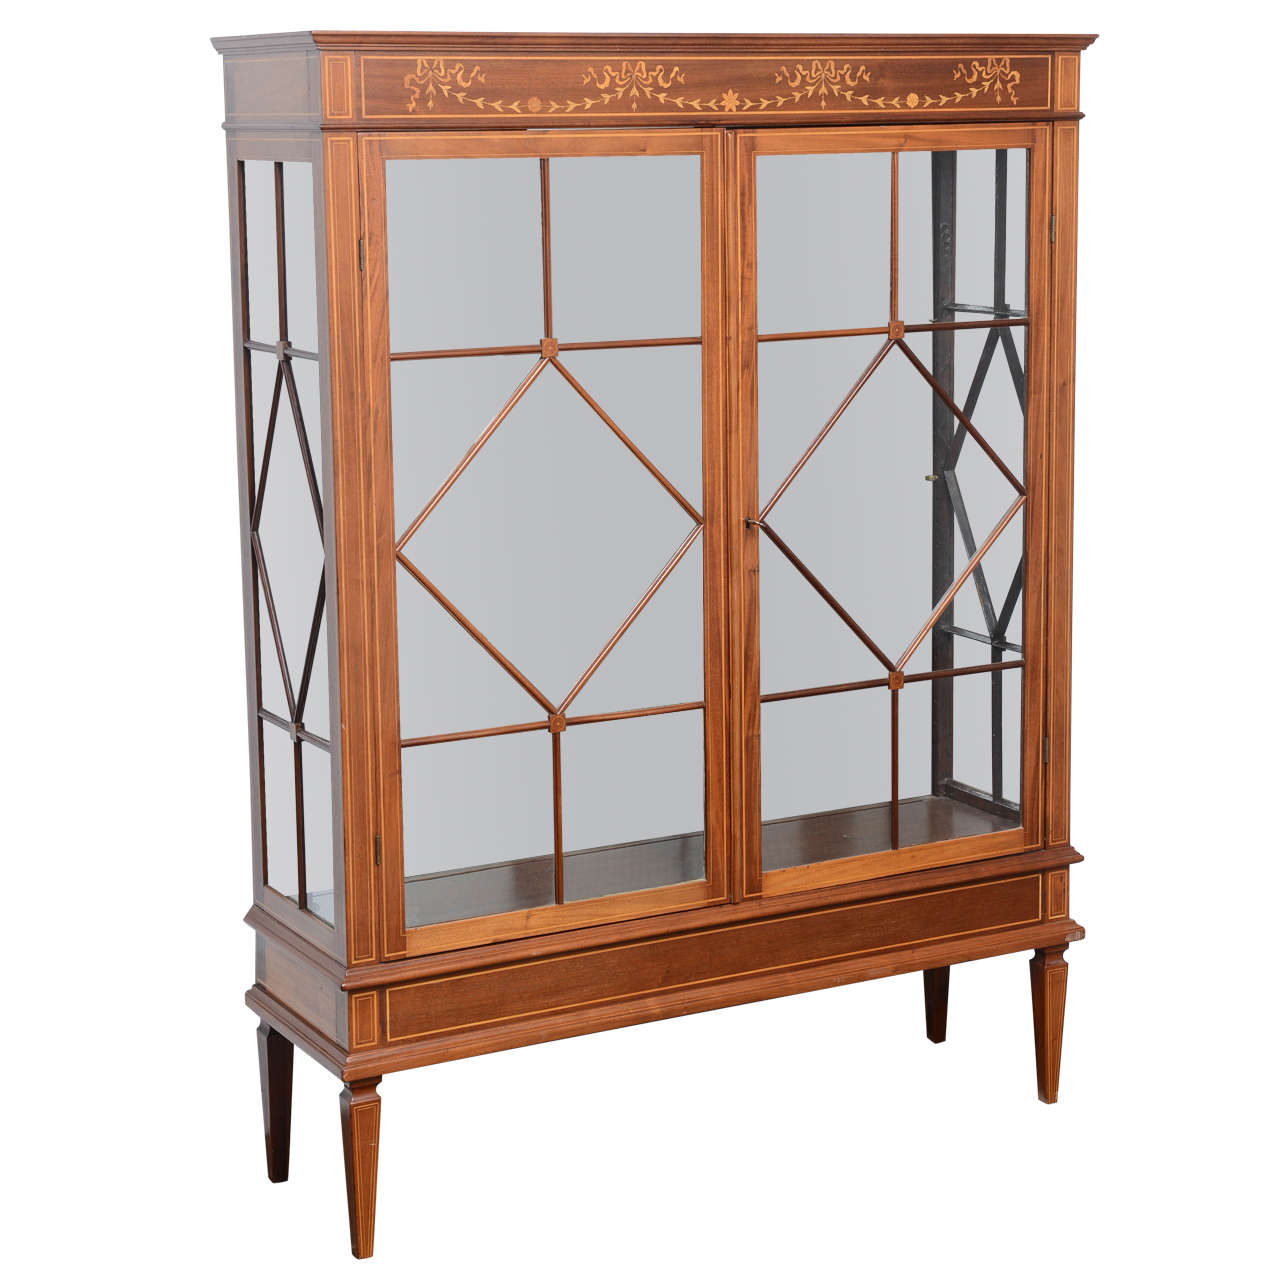 Antique Mahogany Display Cabinet Made in England, Satinwood Inlay